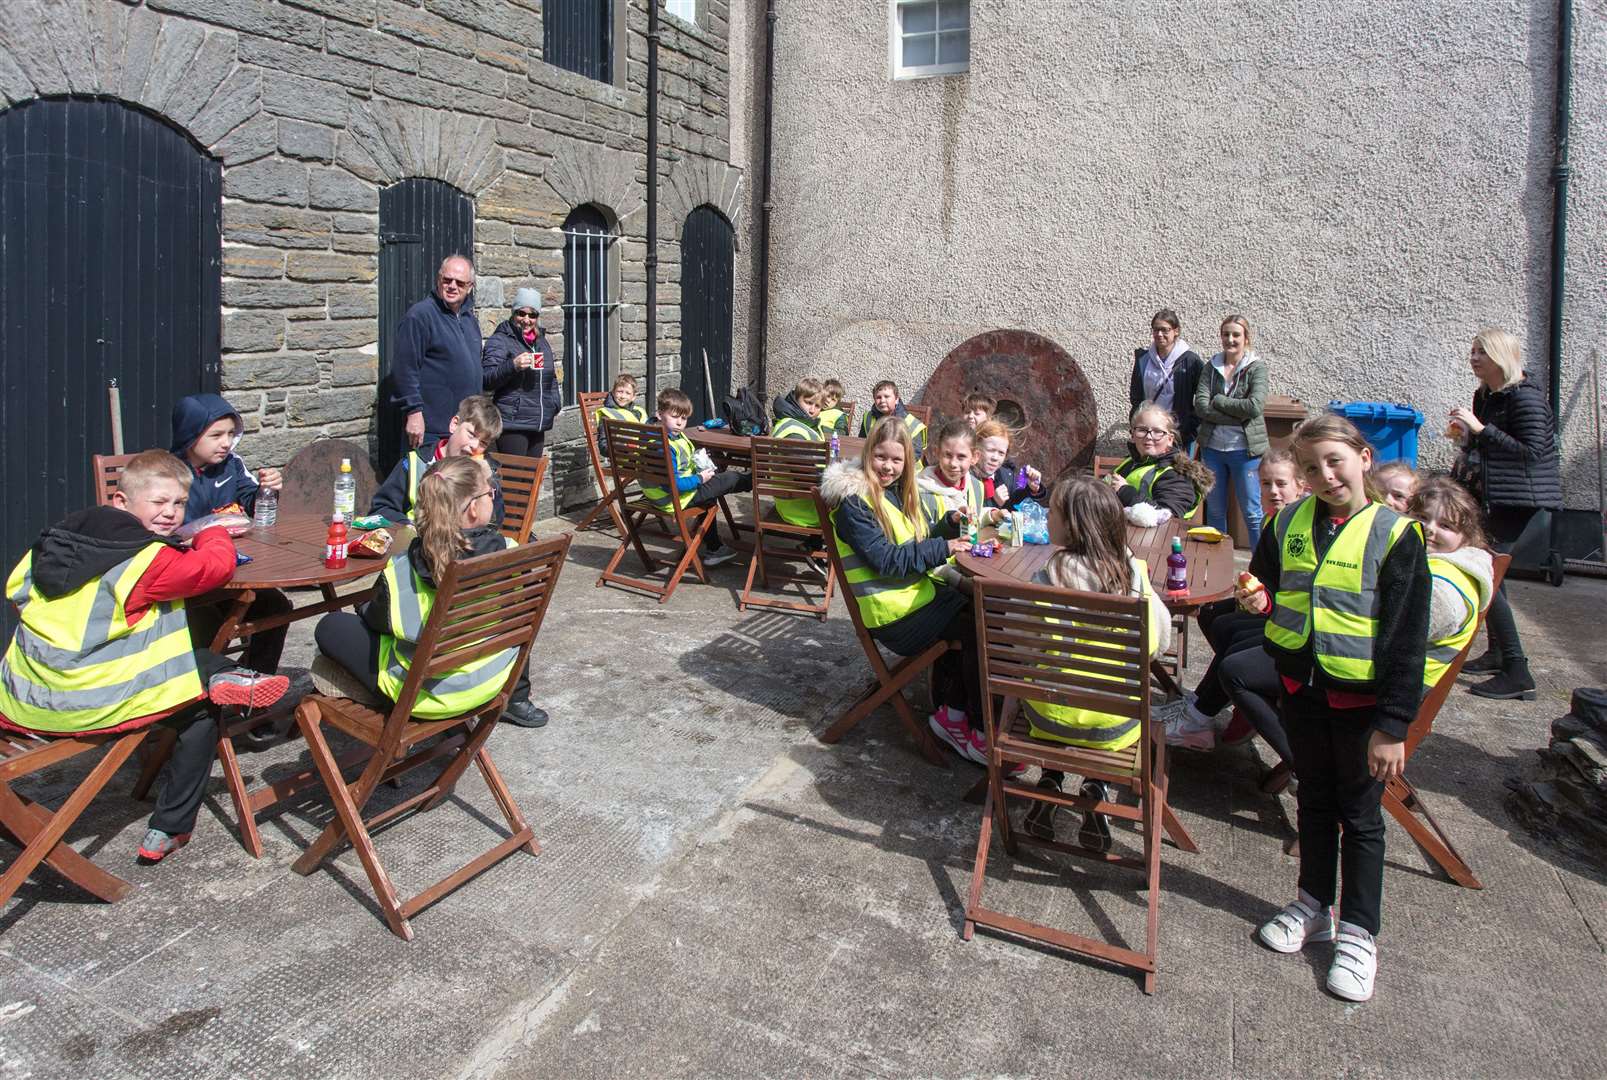 The Noss pupils having a break in the courtyard at Wick Heritage Museum during their tour. Picture: Fergus Mather